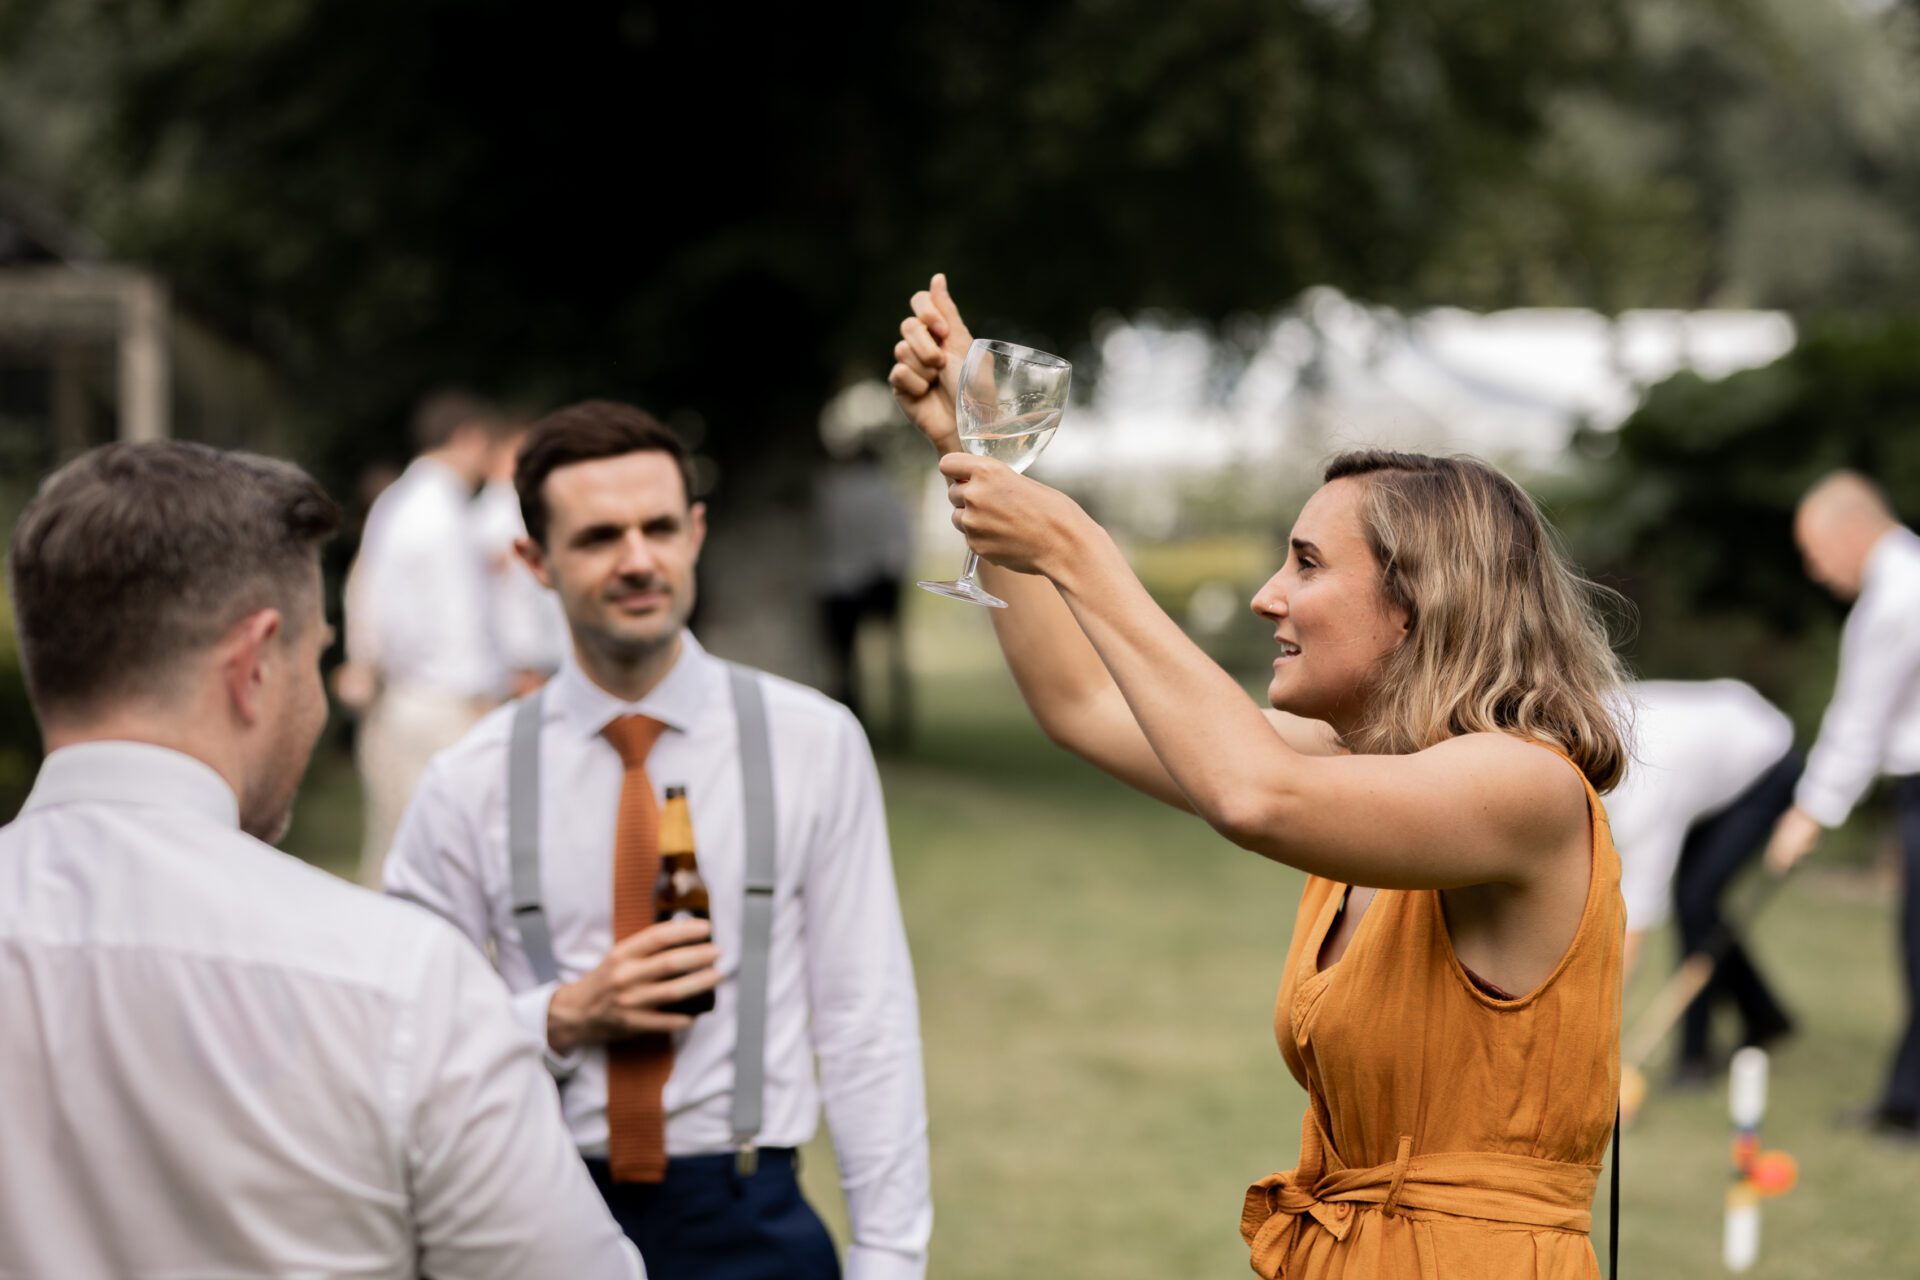 A natural candid shot of wedding guests enjoying themselves